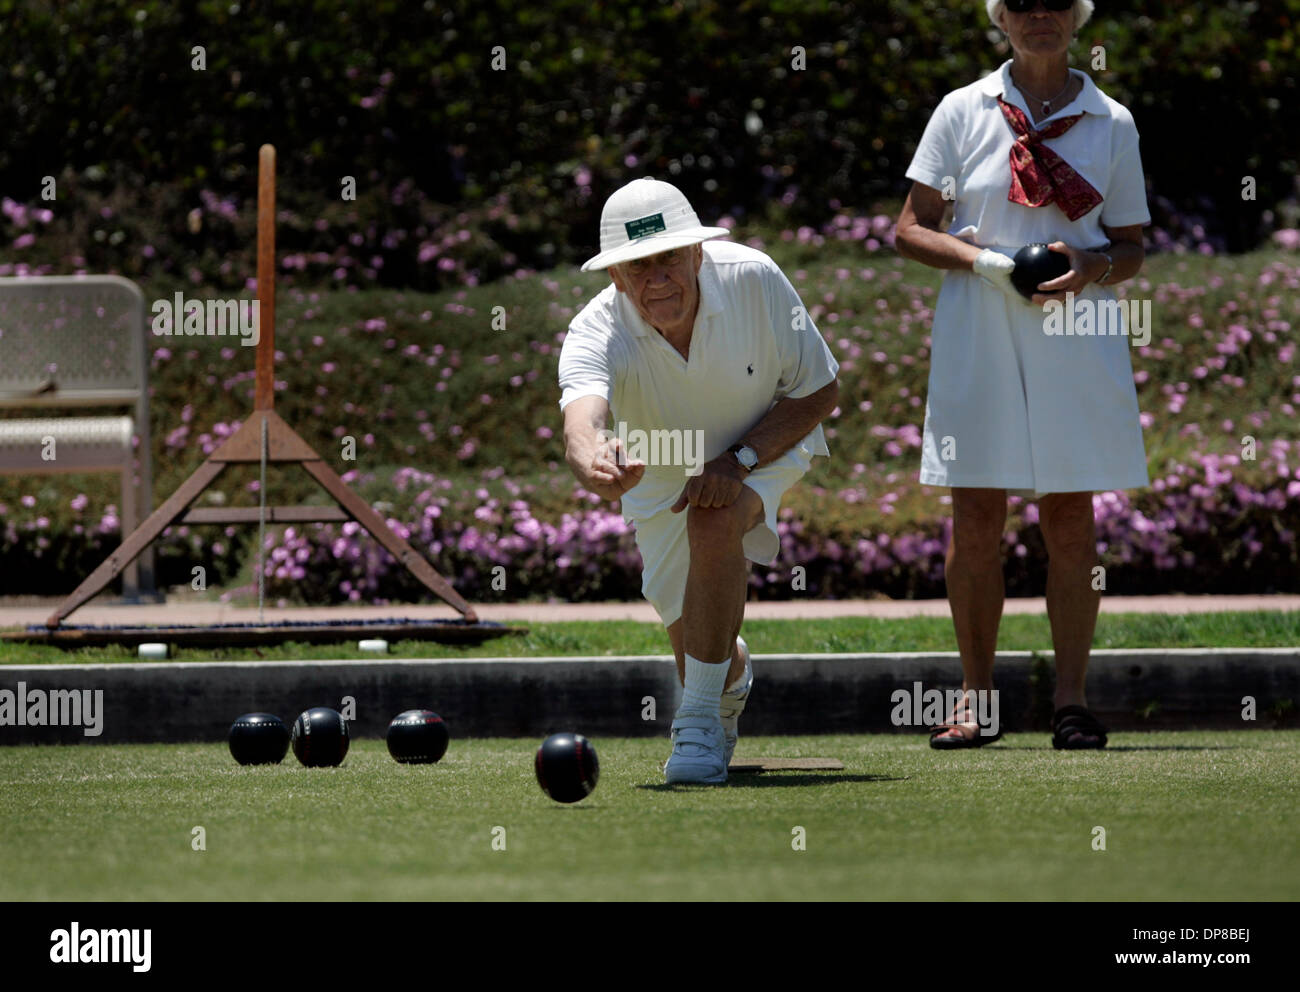 (Published 6/4/2006, B-3) June 2, 2006, San Diego, California, USA  ............ At the San Diego Lawn Bowling Club in Balboa Park, BILL HISCOCK (cq) takes his turn at rolling his bowl.  Competing with Bill is CHRISTINE LUDWIG.  Mandatory Credit: photo by Nelvin C. Cepeda/San Diego Union-Tribune/Zuma Press,. Copyright 2006 San Diego Union-Tribune Stock Photo